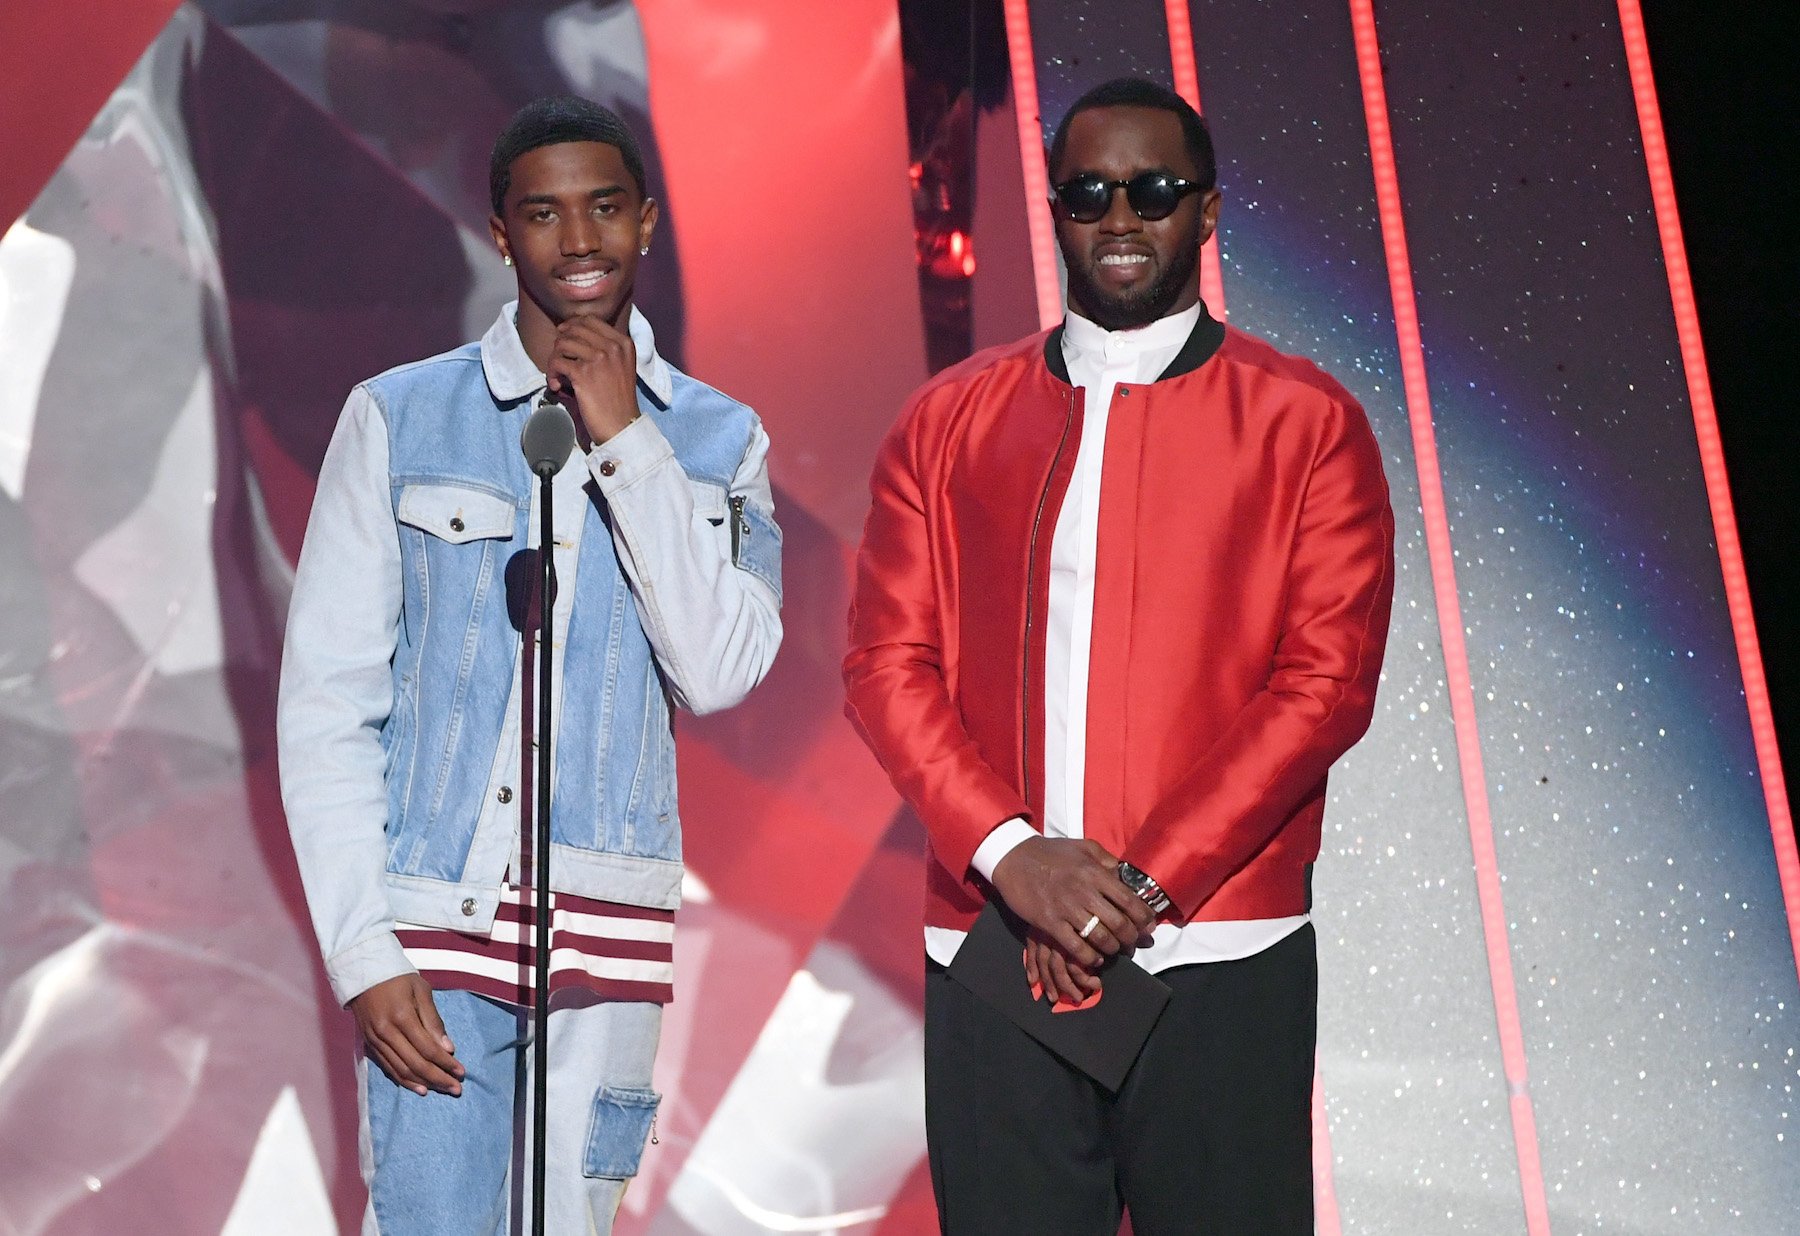 Christian 'King' Combs, who spoke out about nepo babies, and Sean ‘Diddy’ Combs on stage together